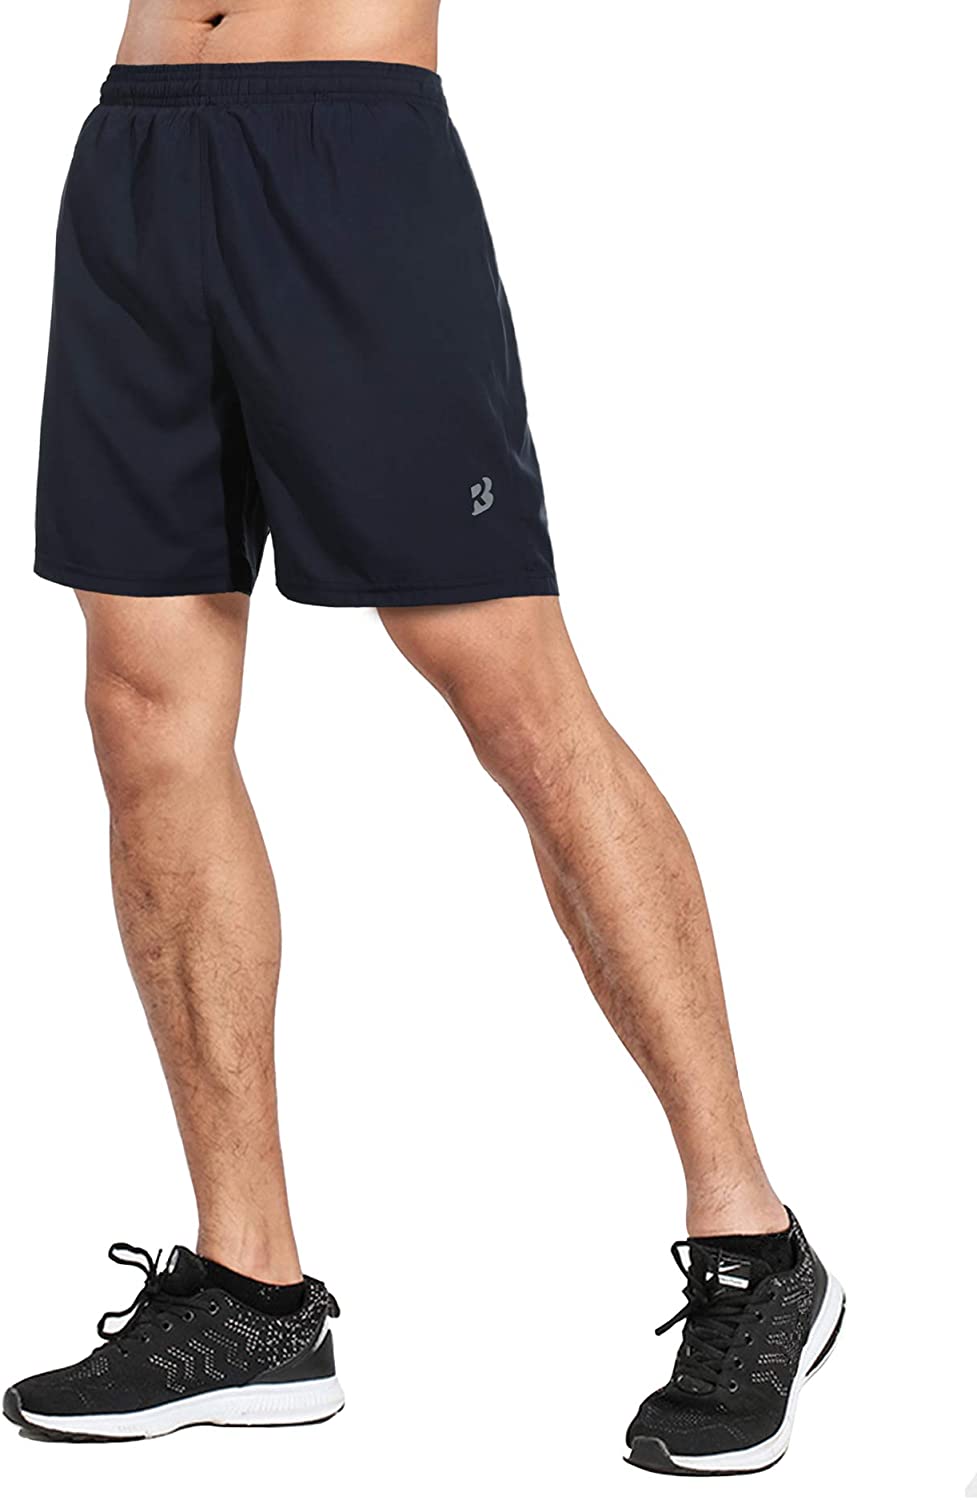  Workout Shorts 5 Inch for push your ABS